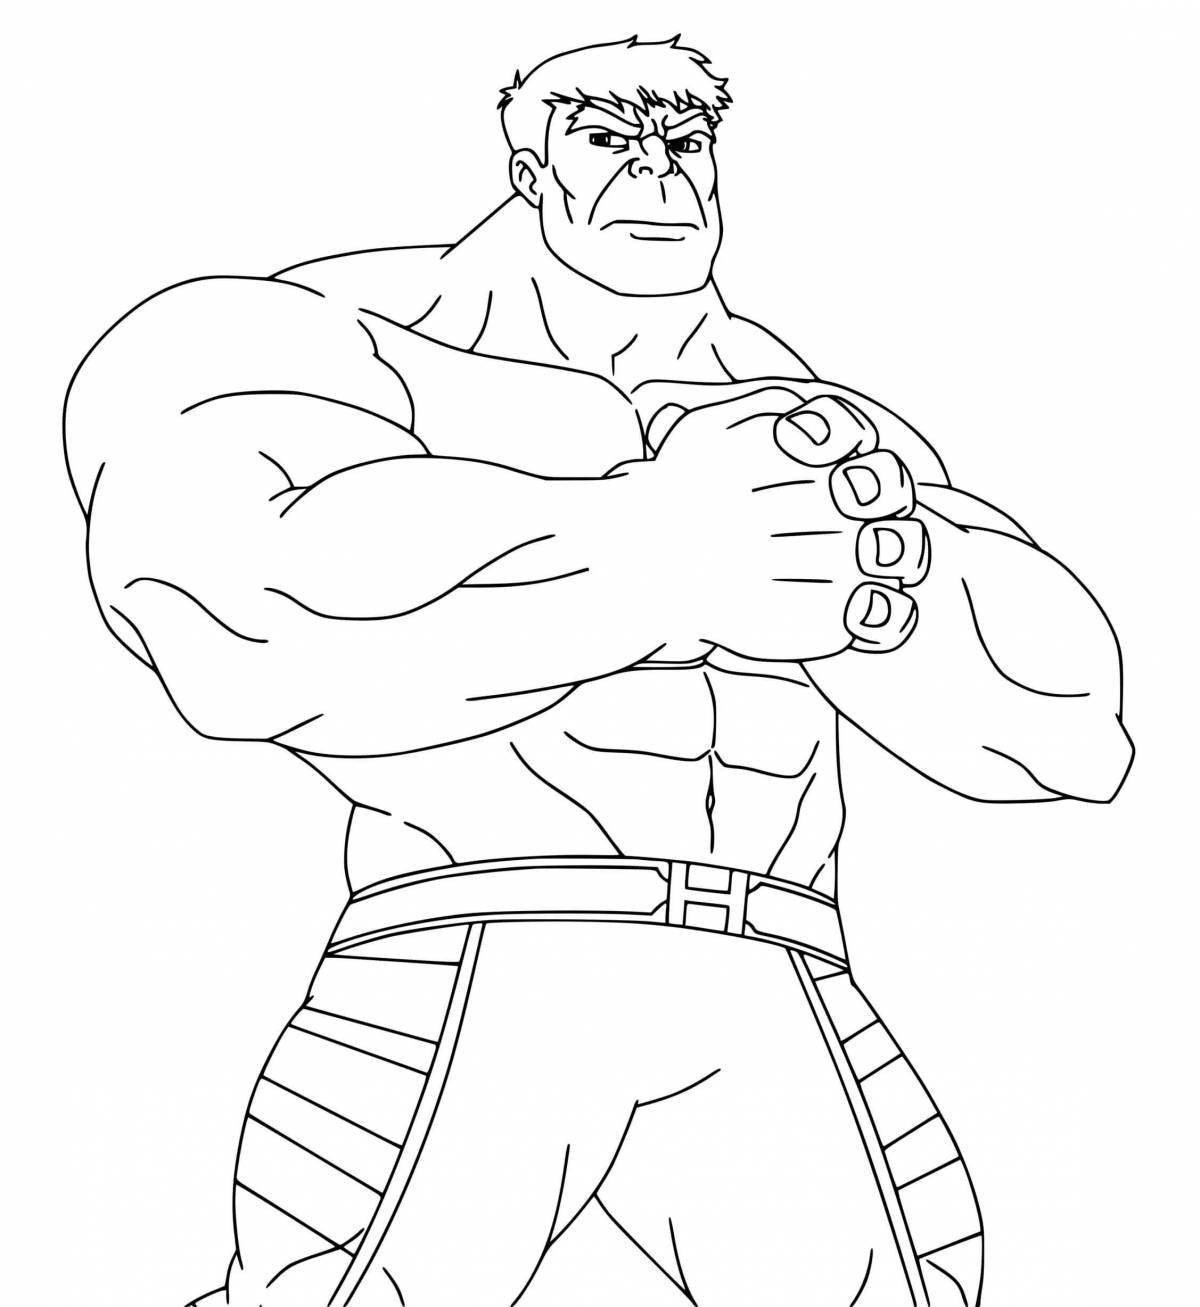 Coloring bright hulk for kids